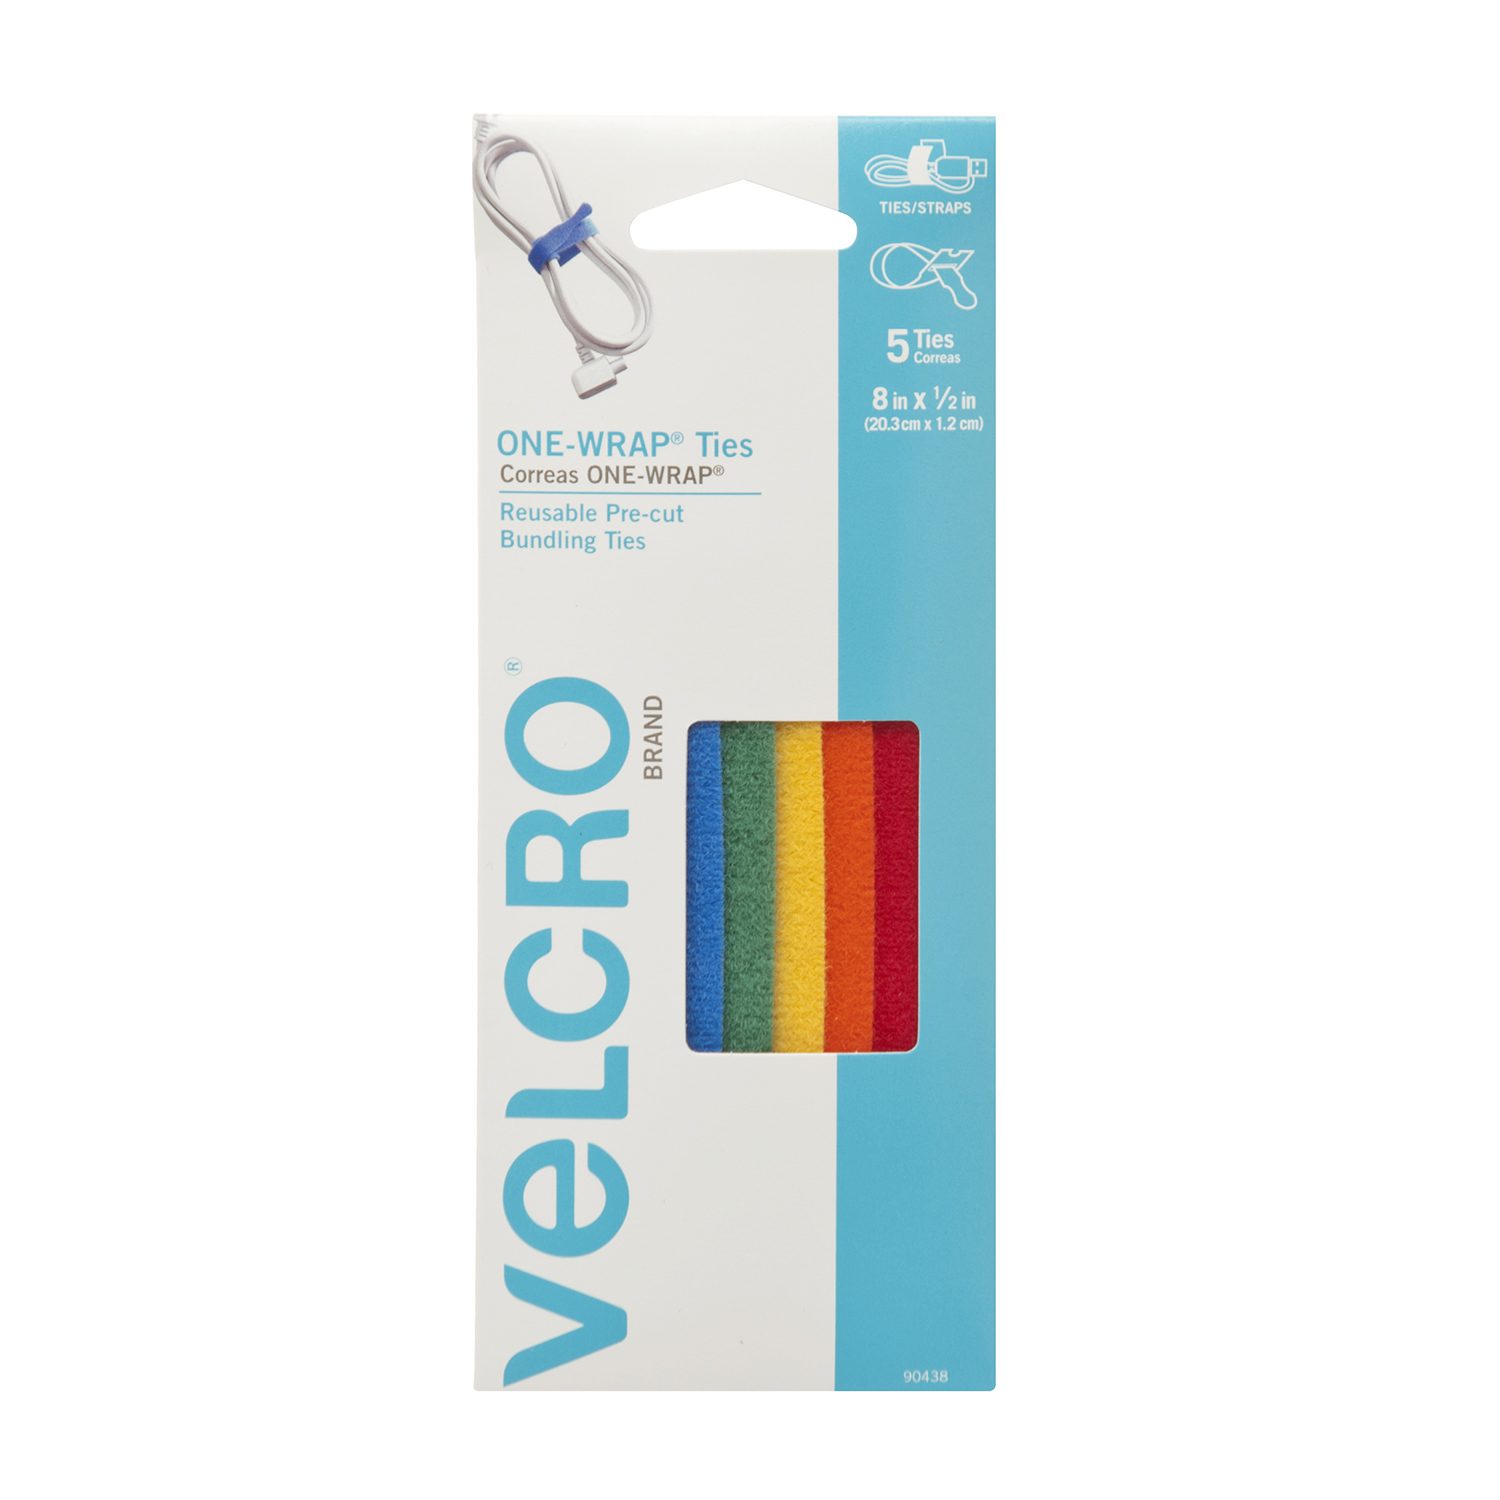 Velcro One-Wrap Strap - 1/2 x 75 ft. Roll